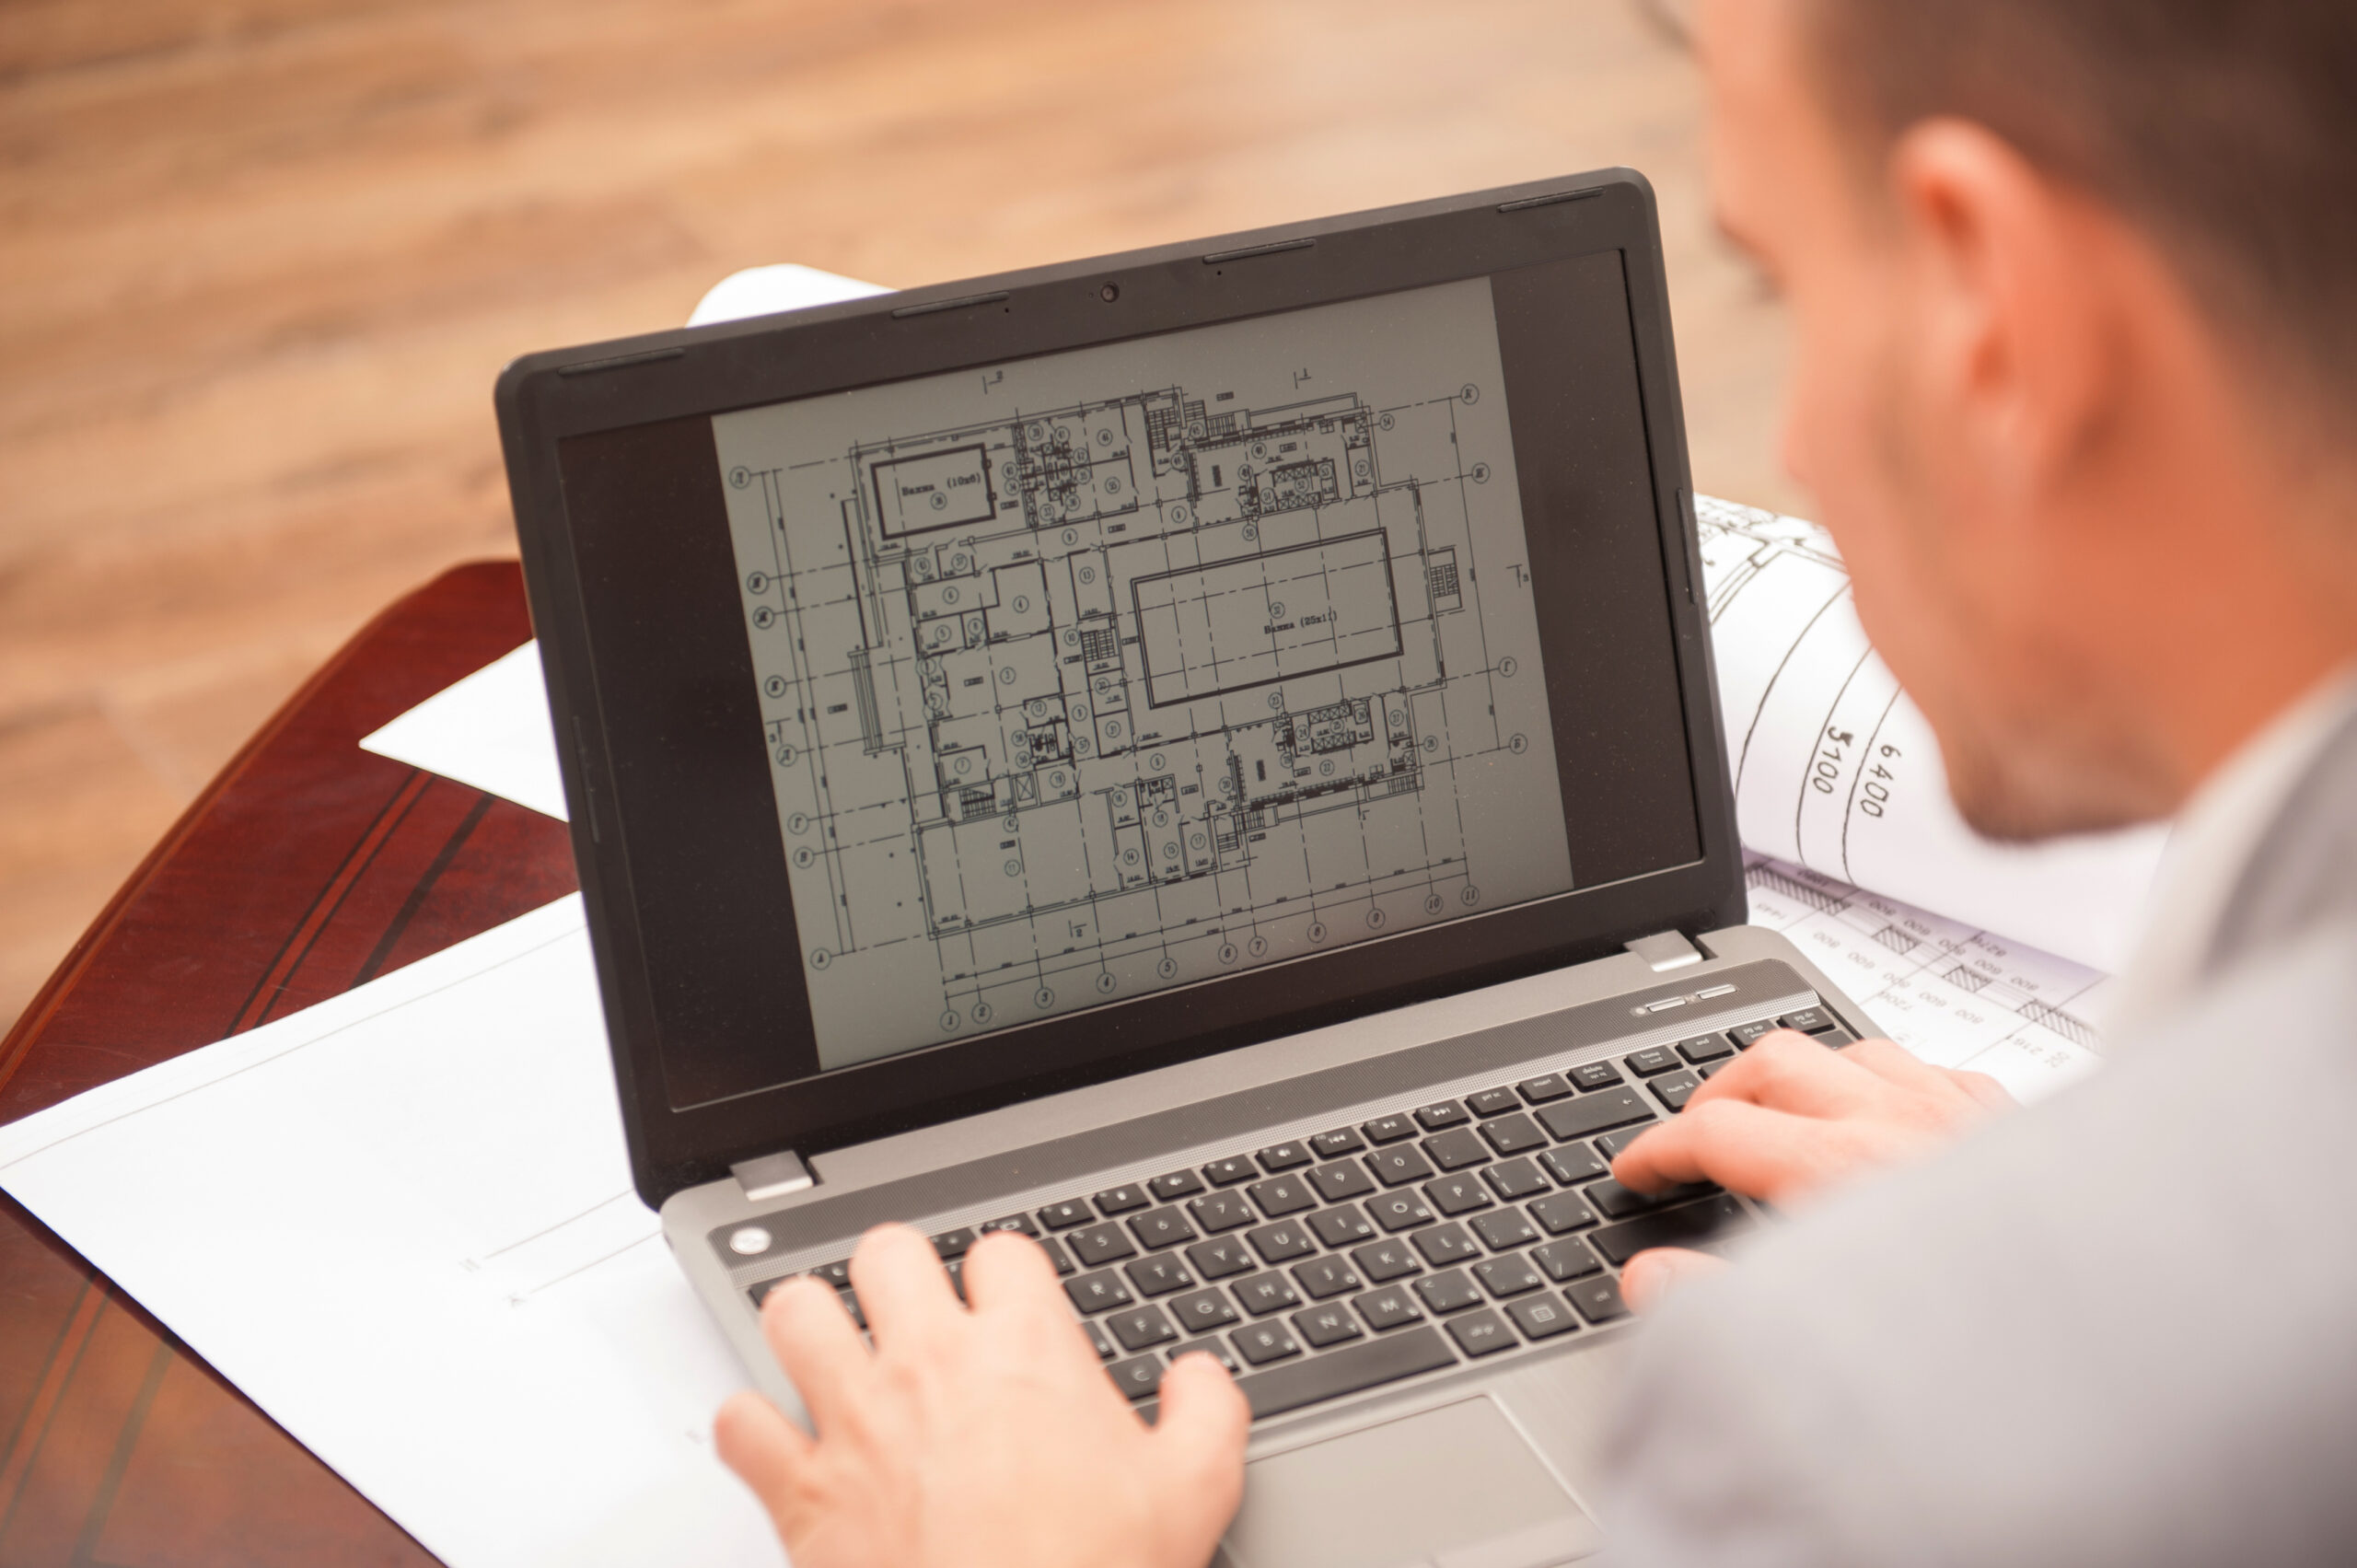 Close-up portrait of laptop with blueprints, architect sitting from behind working on architectural plan, interior shot